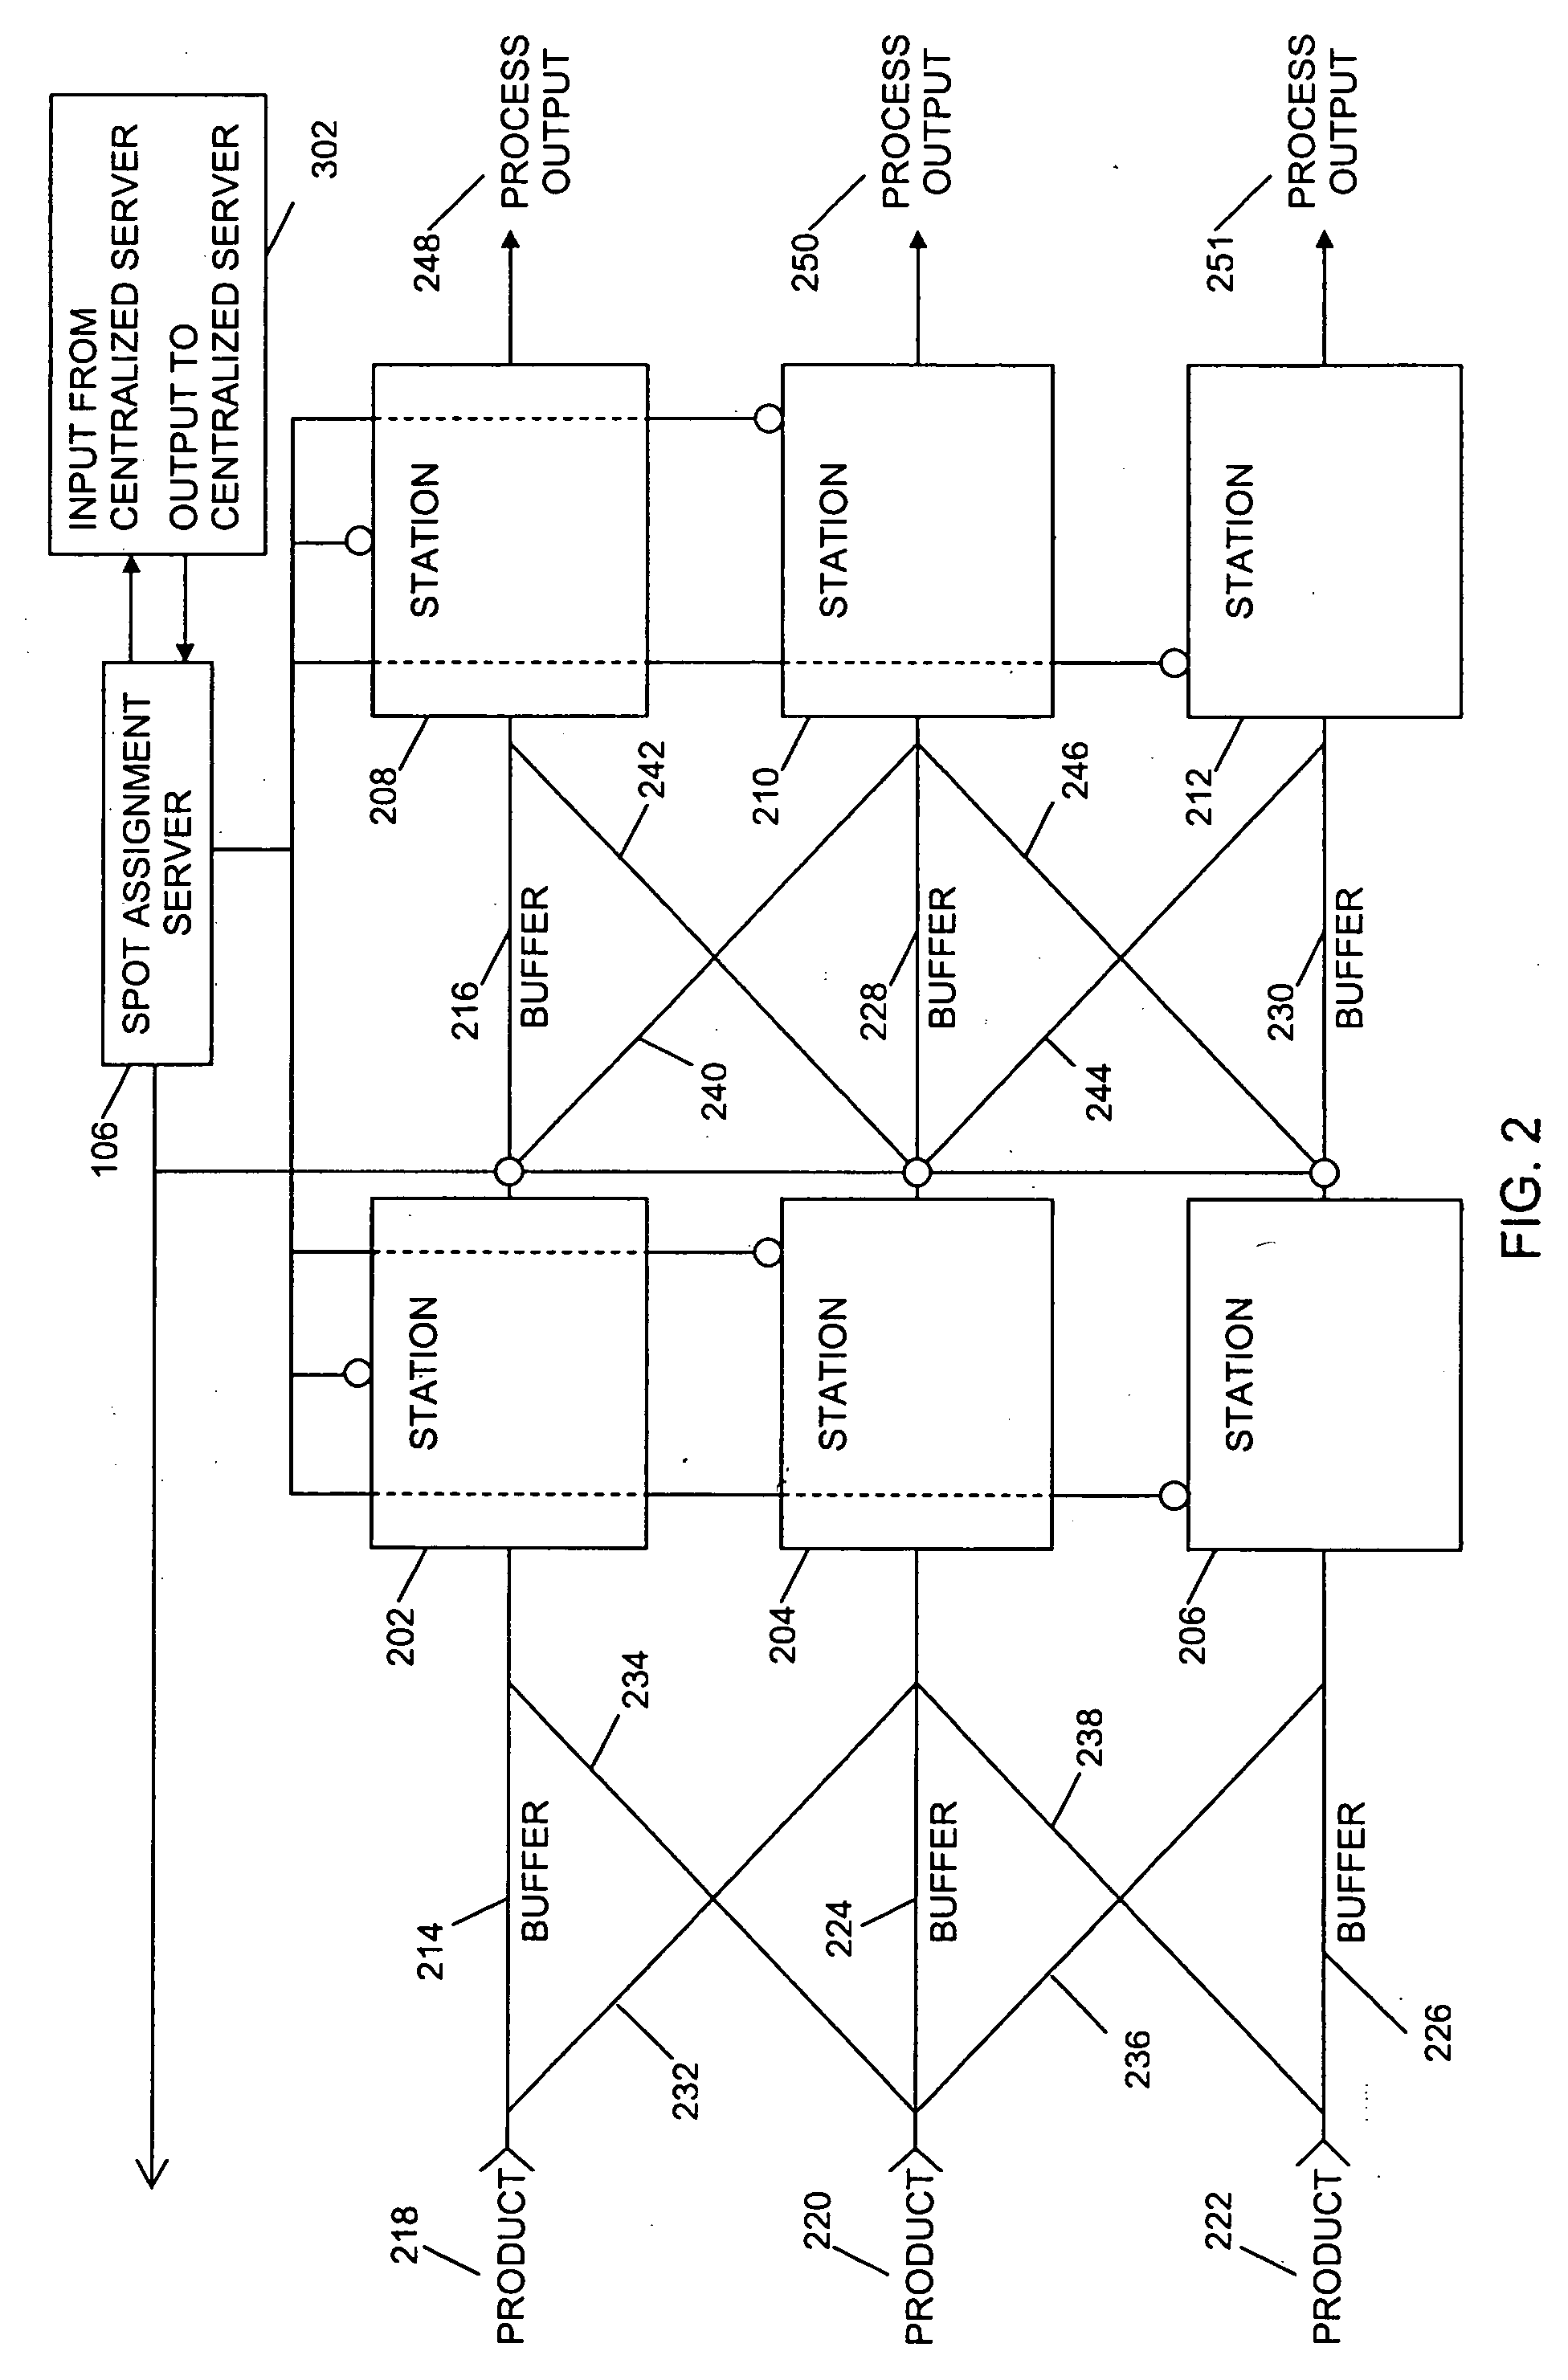 System and method for adaptive machine programming